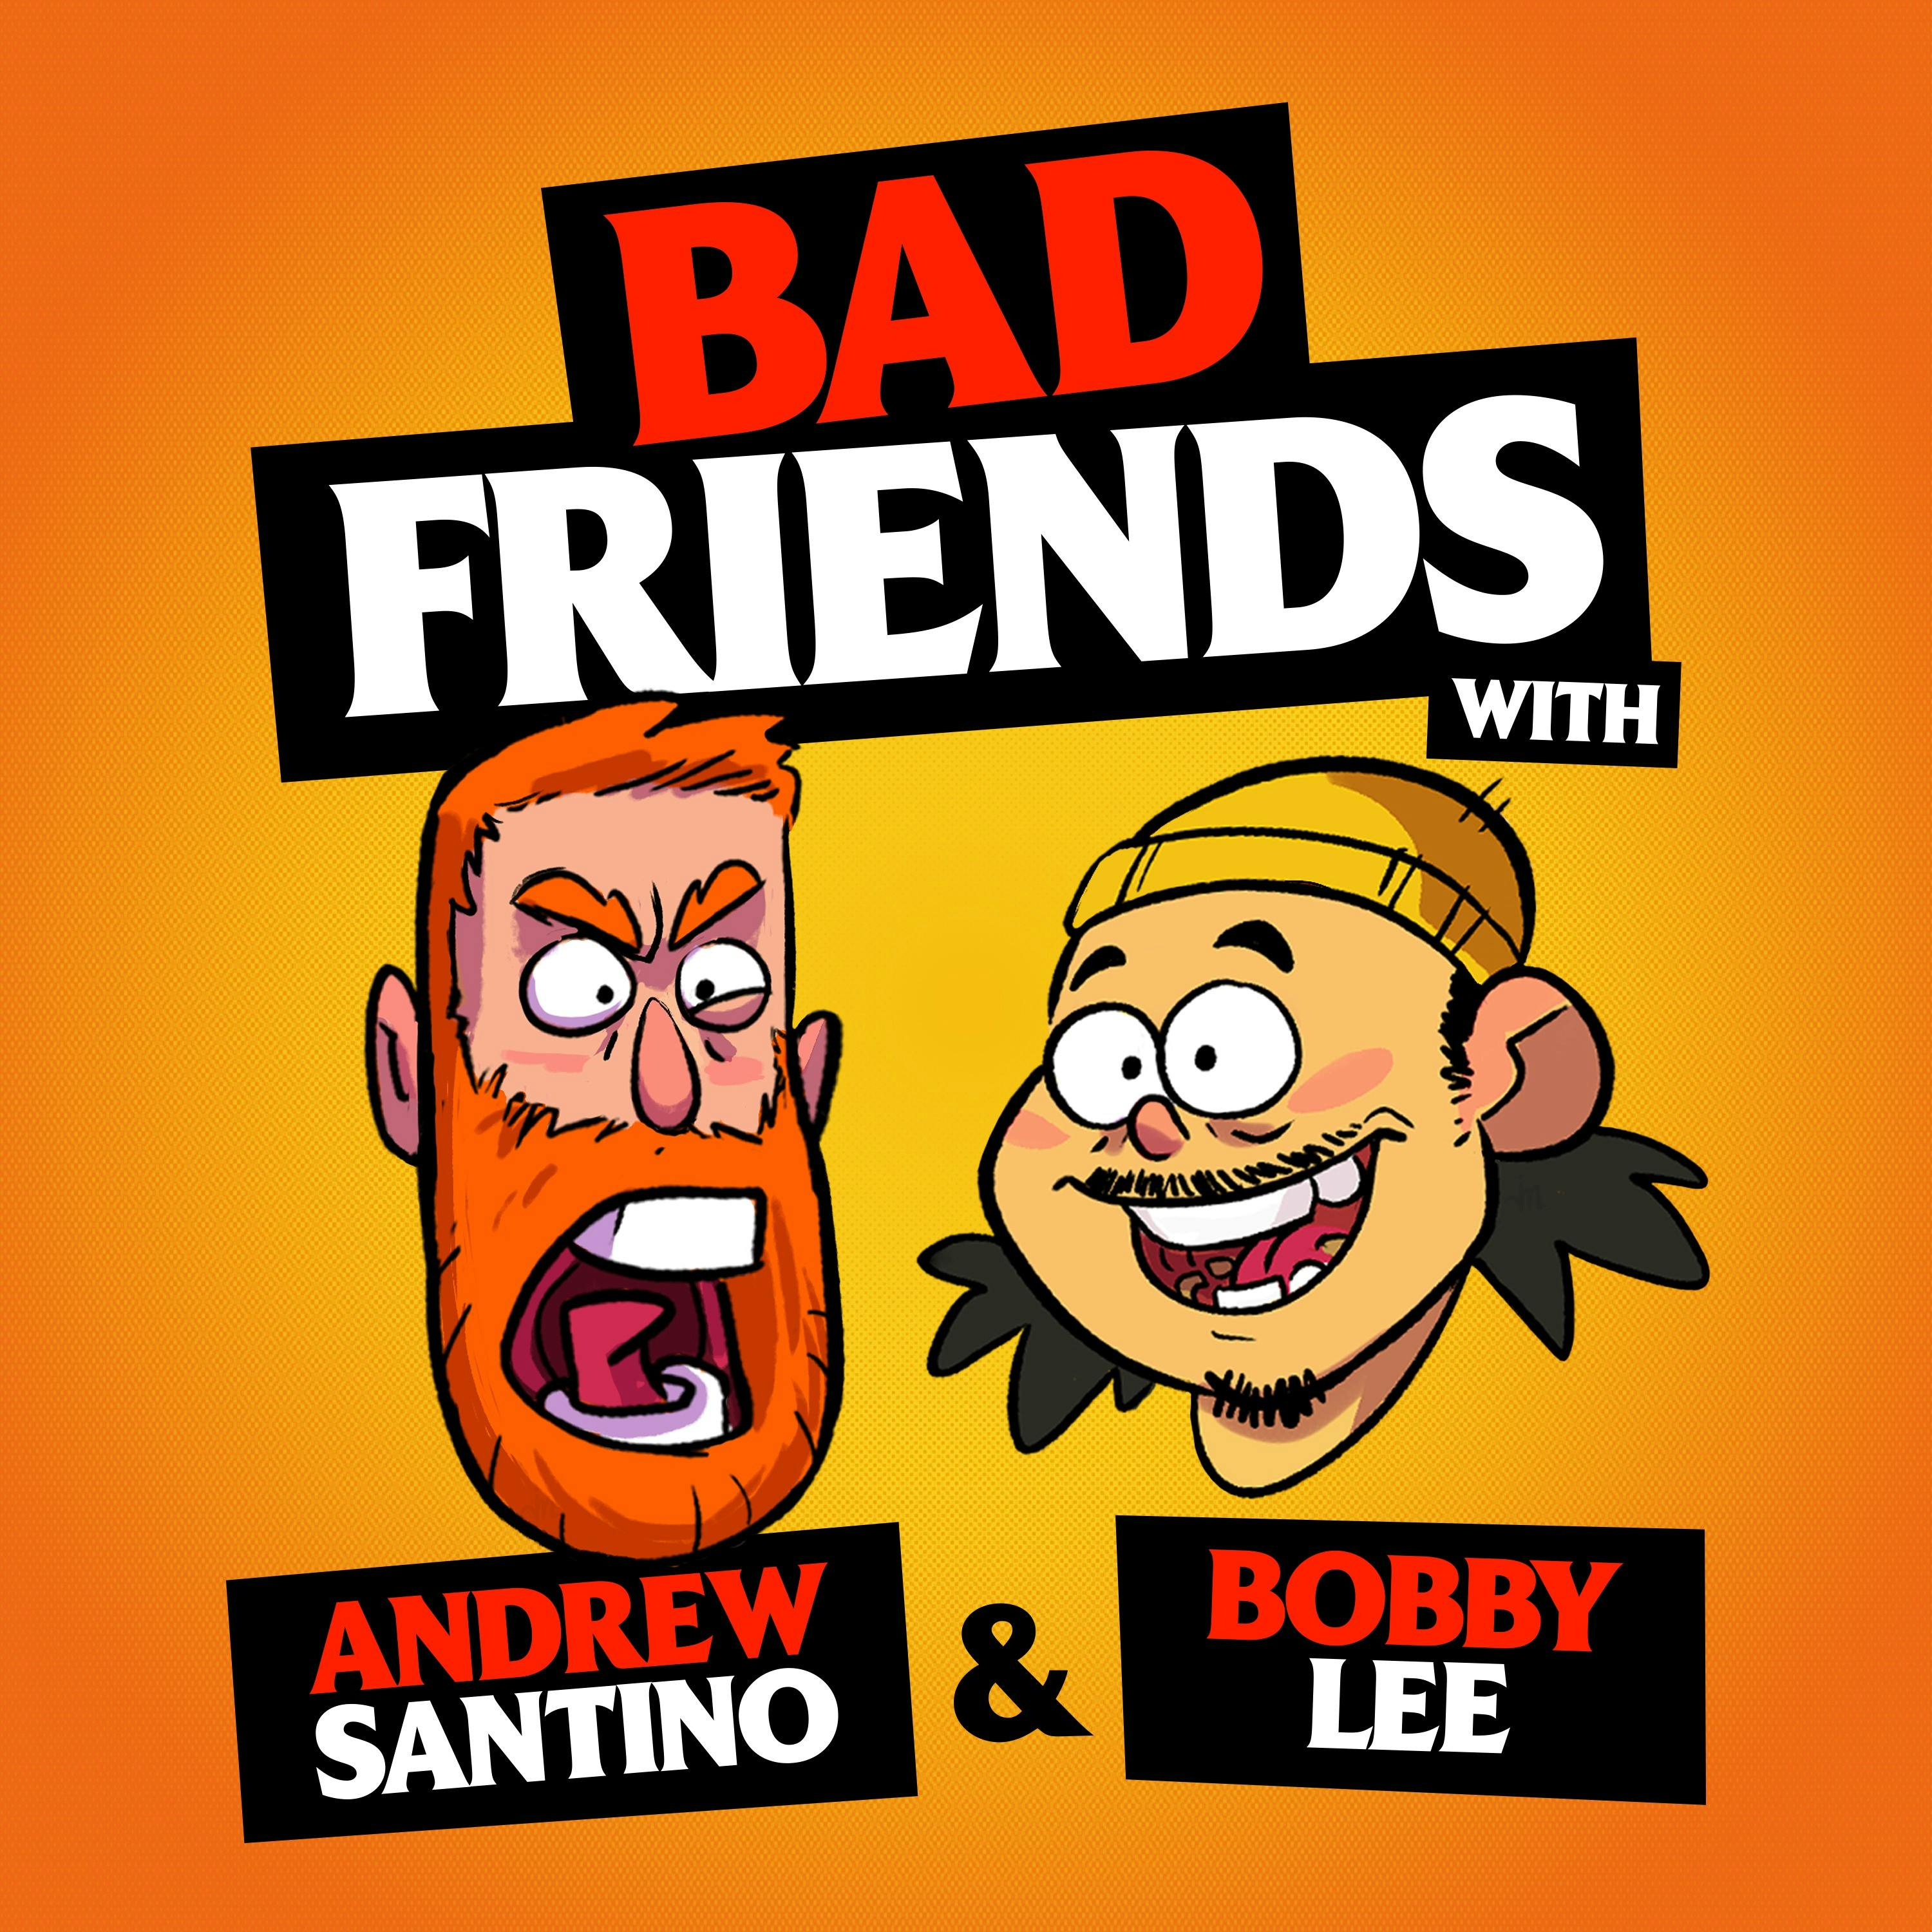 How The Bobo Ruined Christmas! by Andrew Santino and Bobby Lee